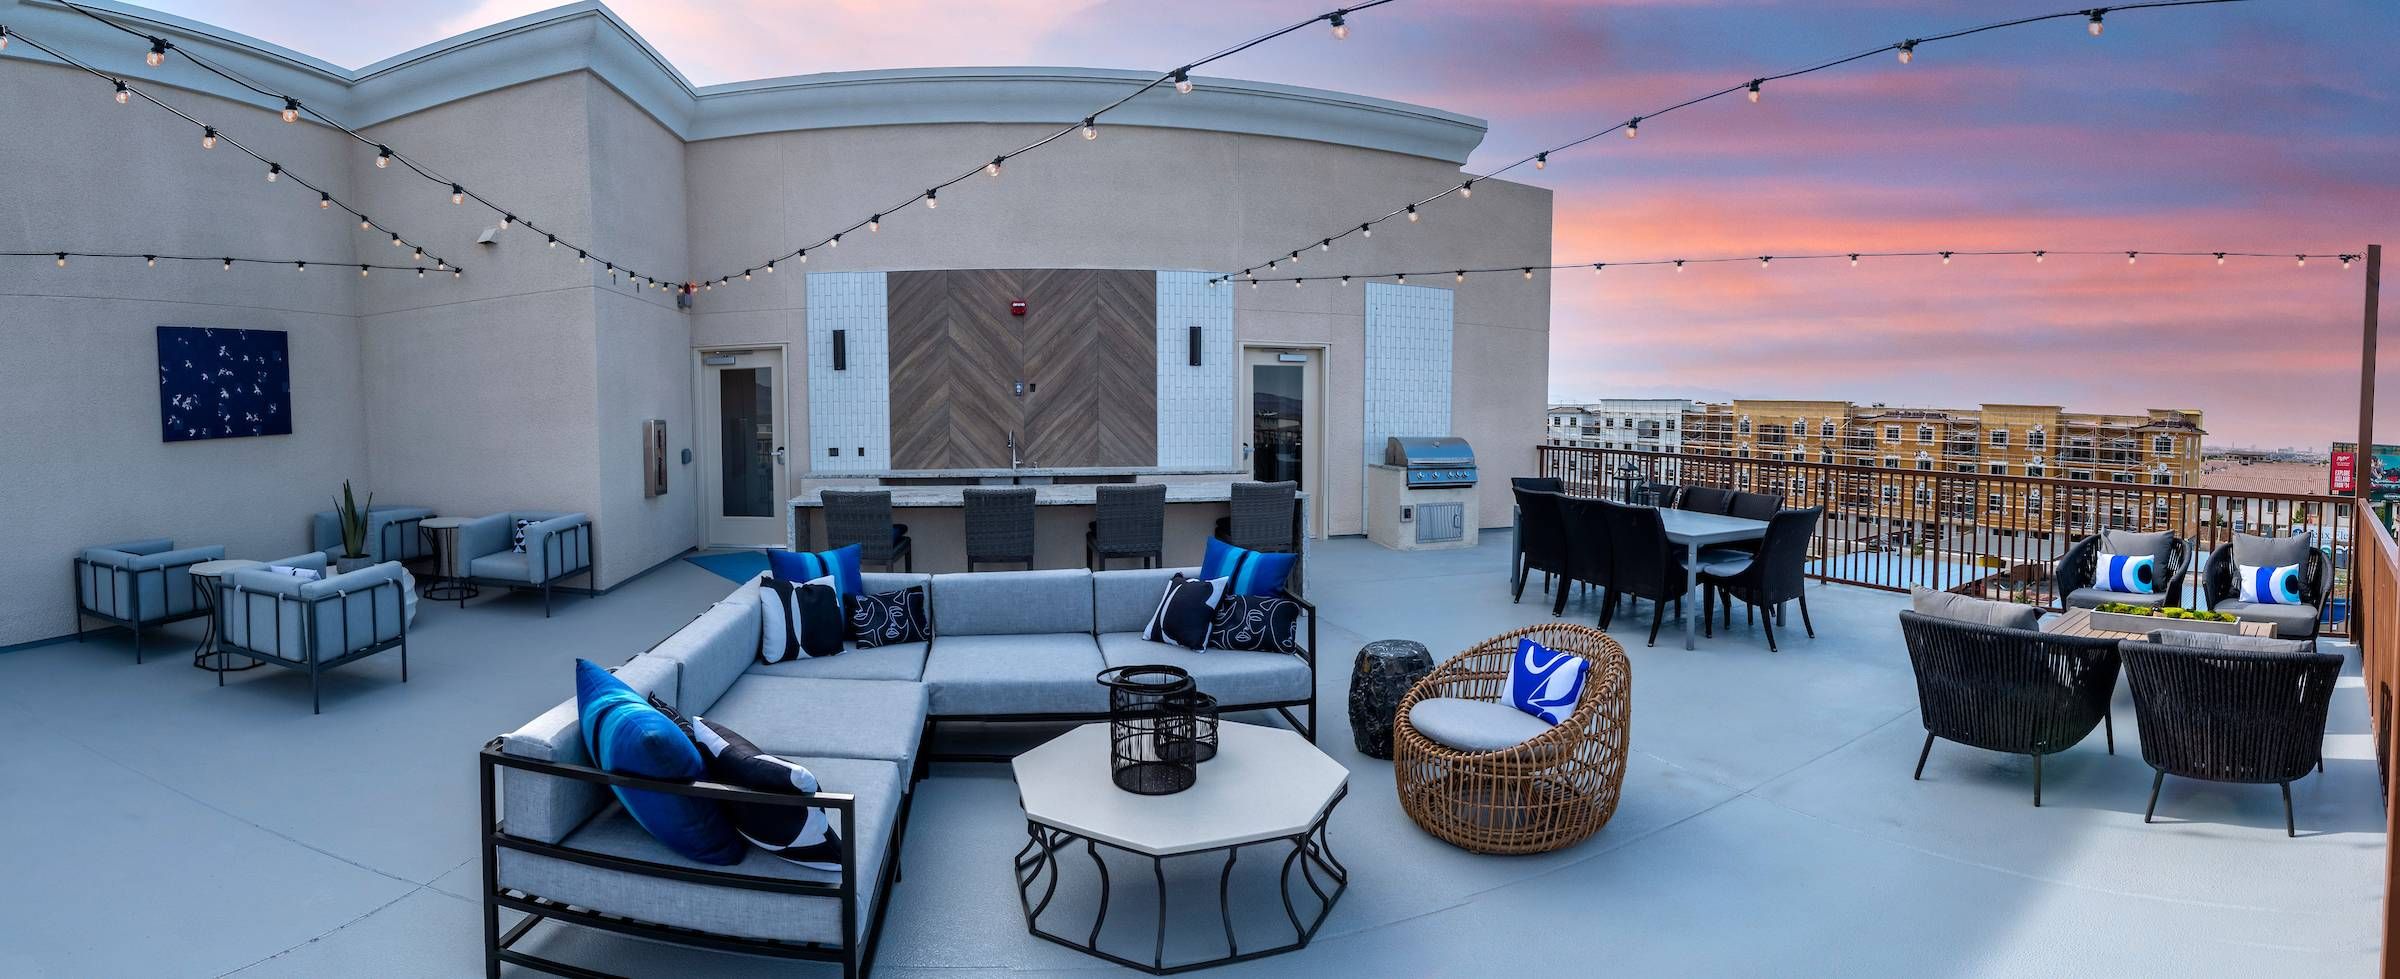 The rooftop terrace at Alta Southern Highlands features comfortable outdoor seating, string lights, and a sunset view.